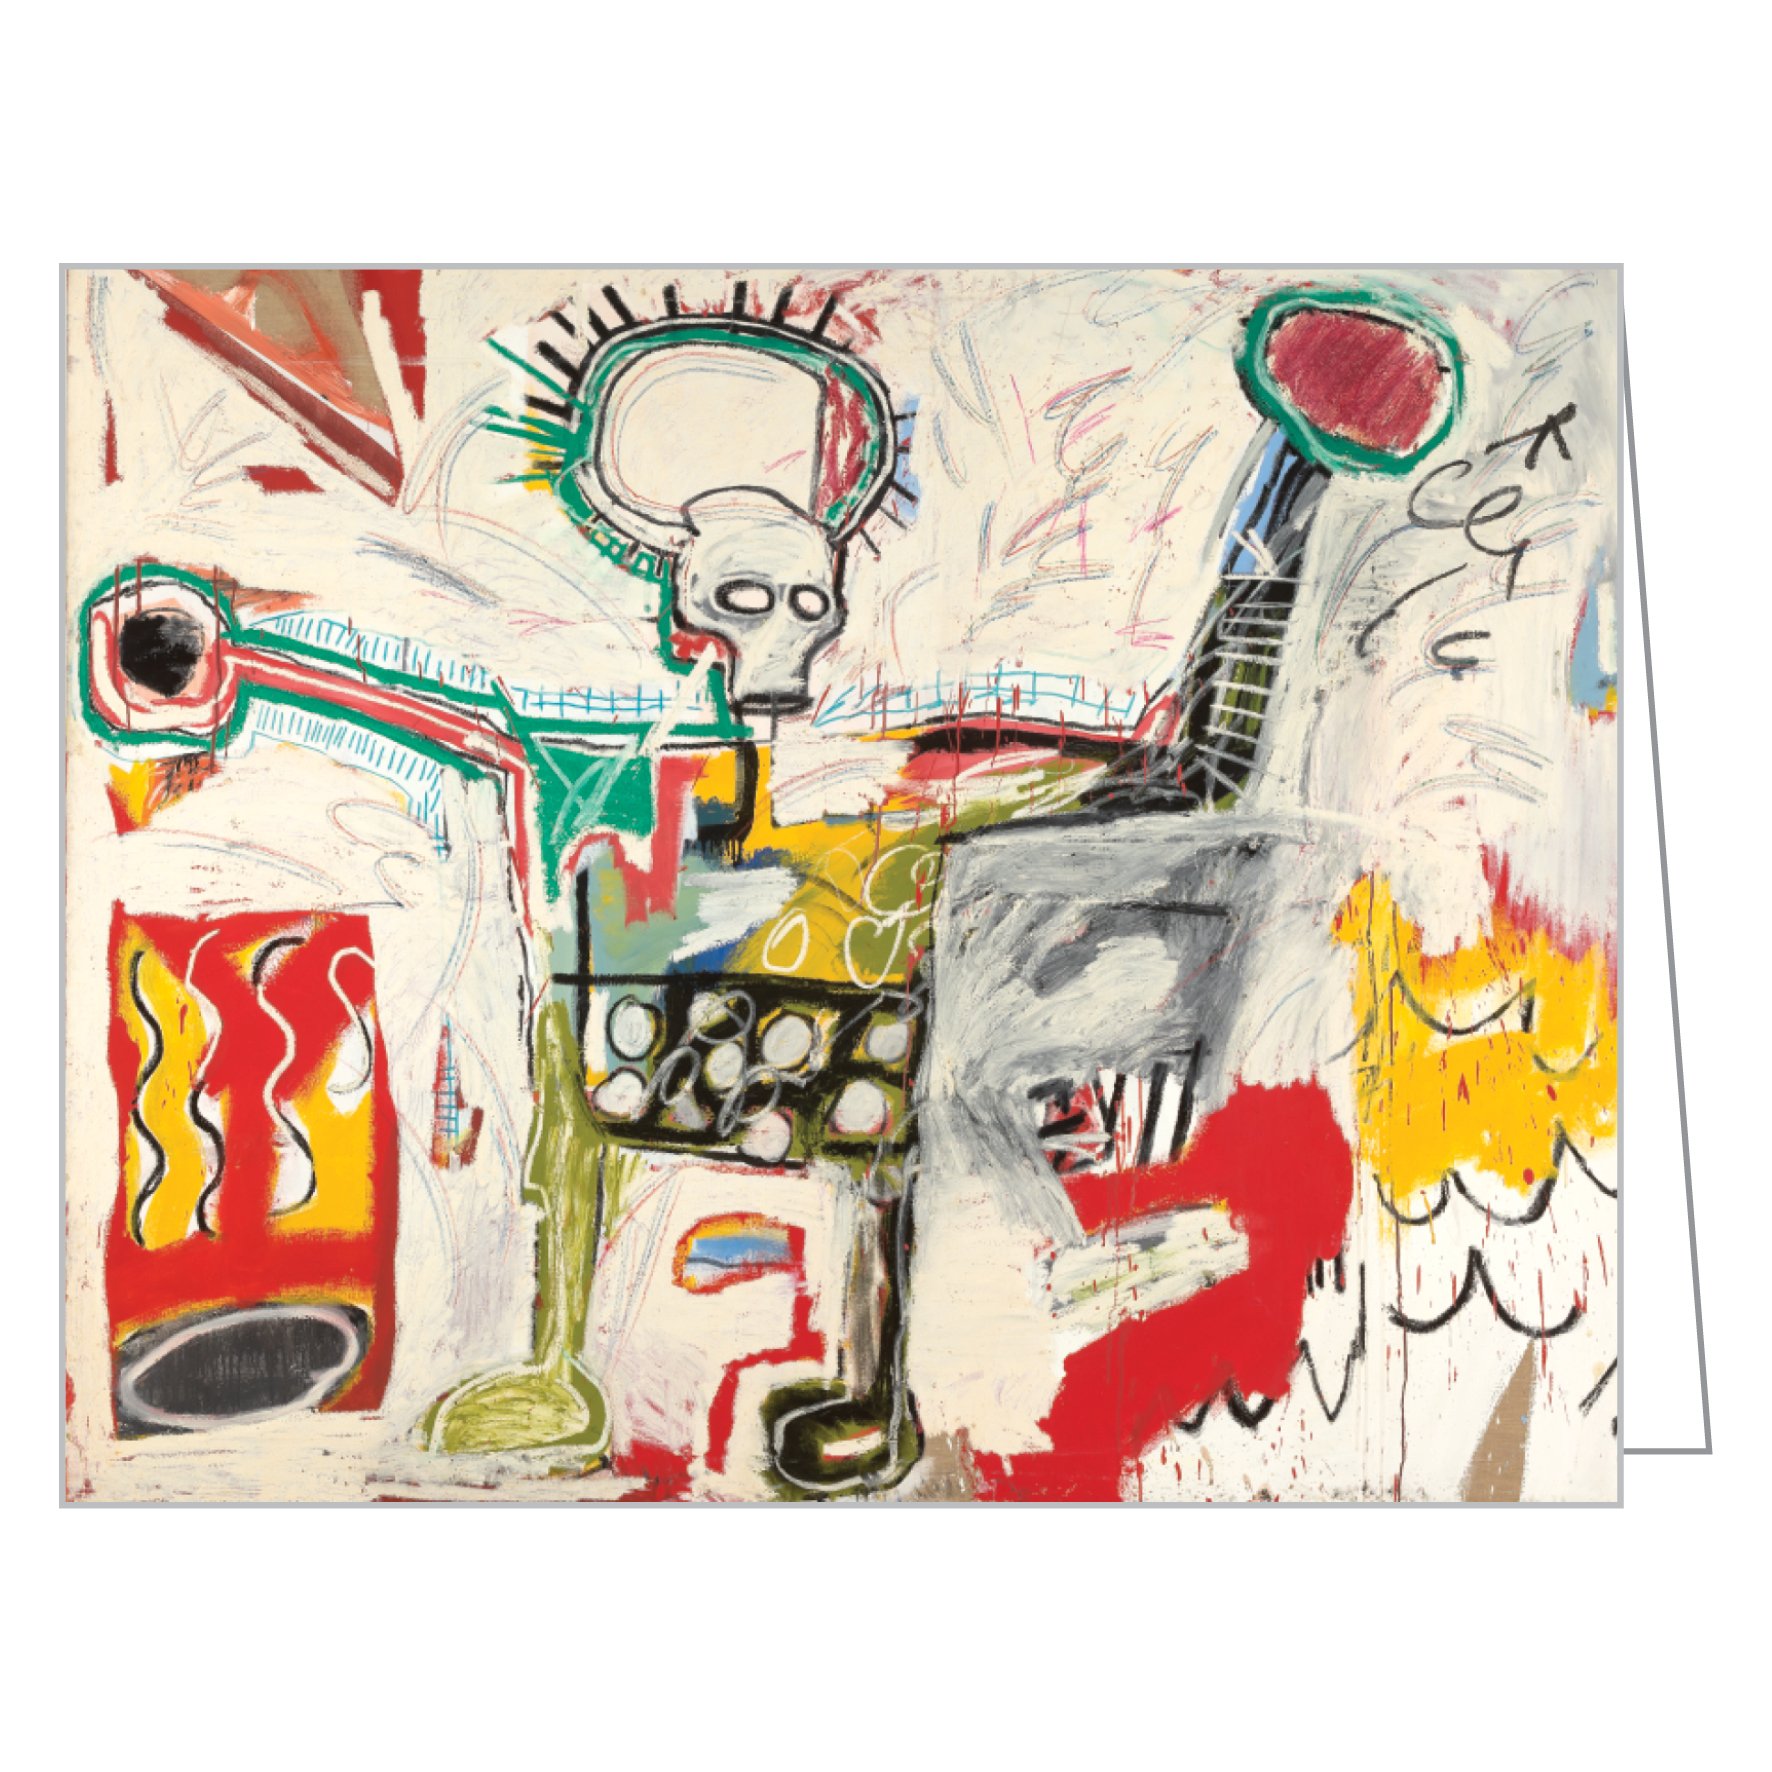 Jean-Michel Basquiat's 1983 'Crown' painting, to notecard box, by teNeues stationery.